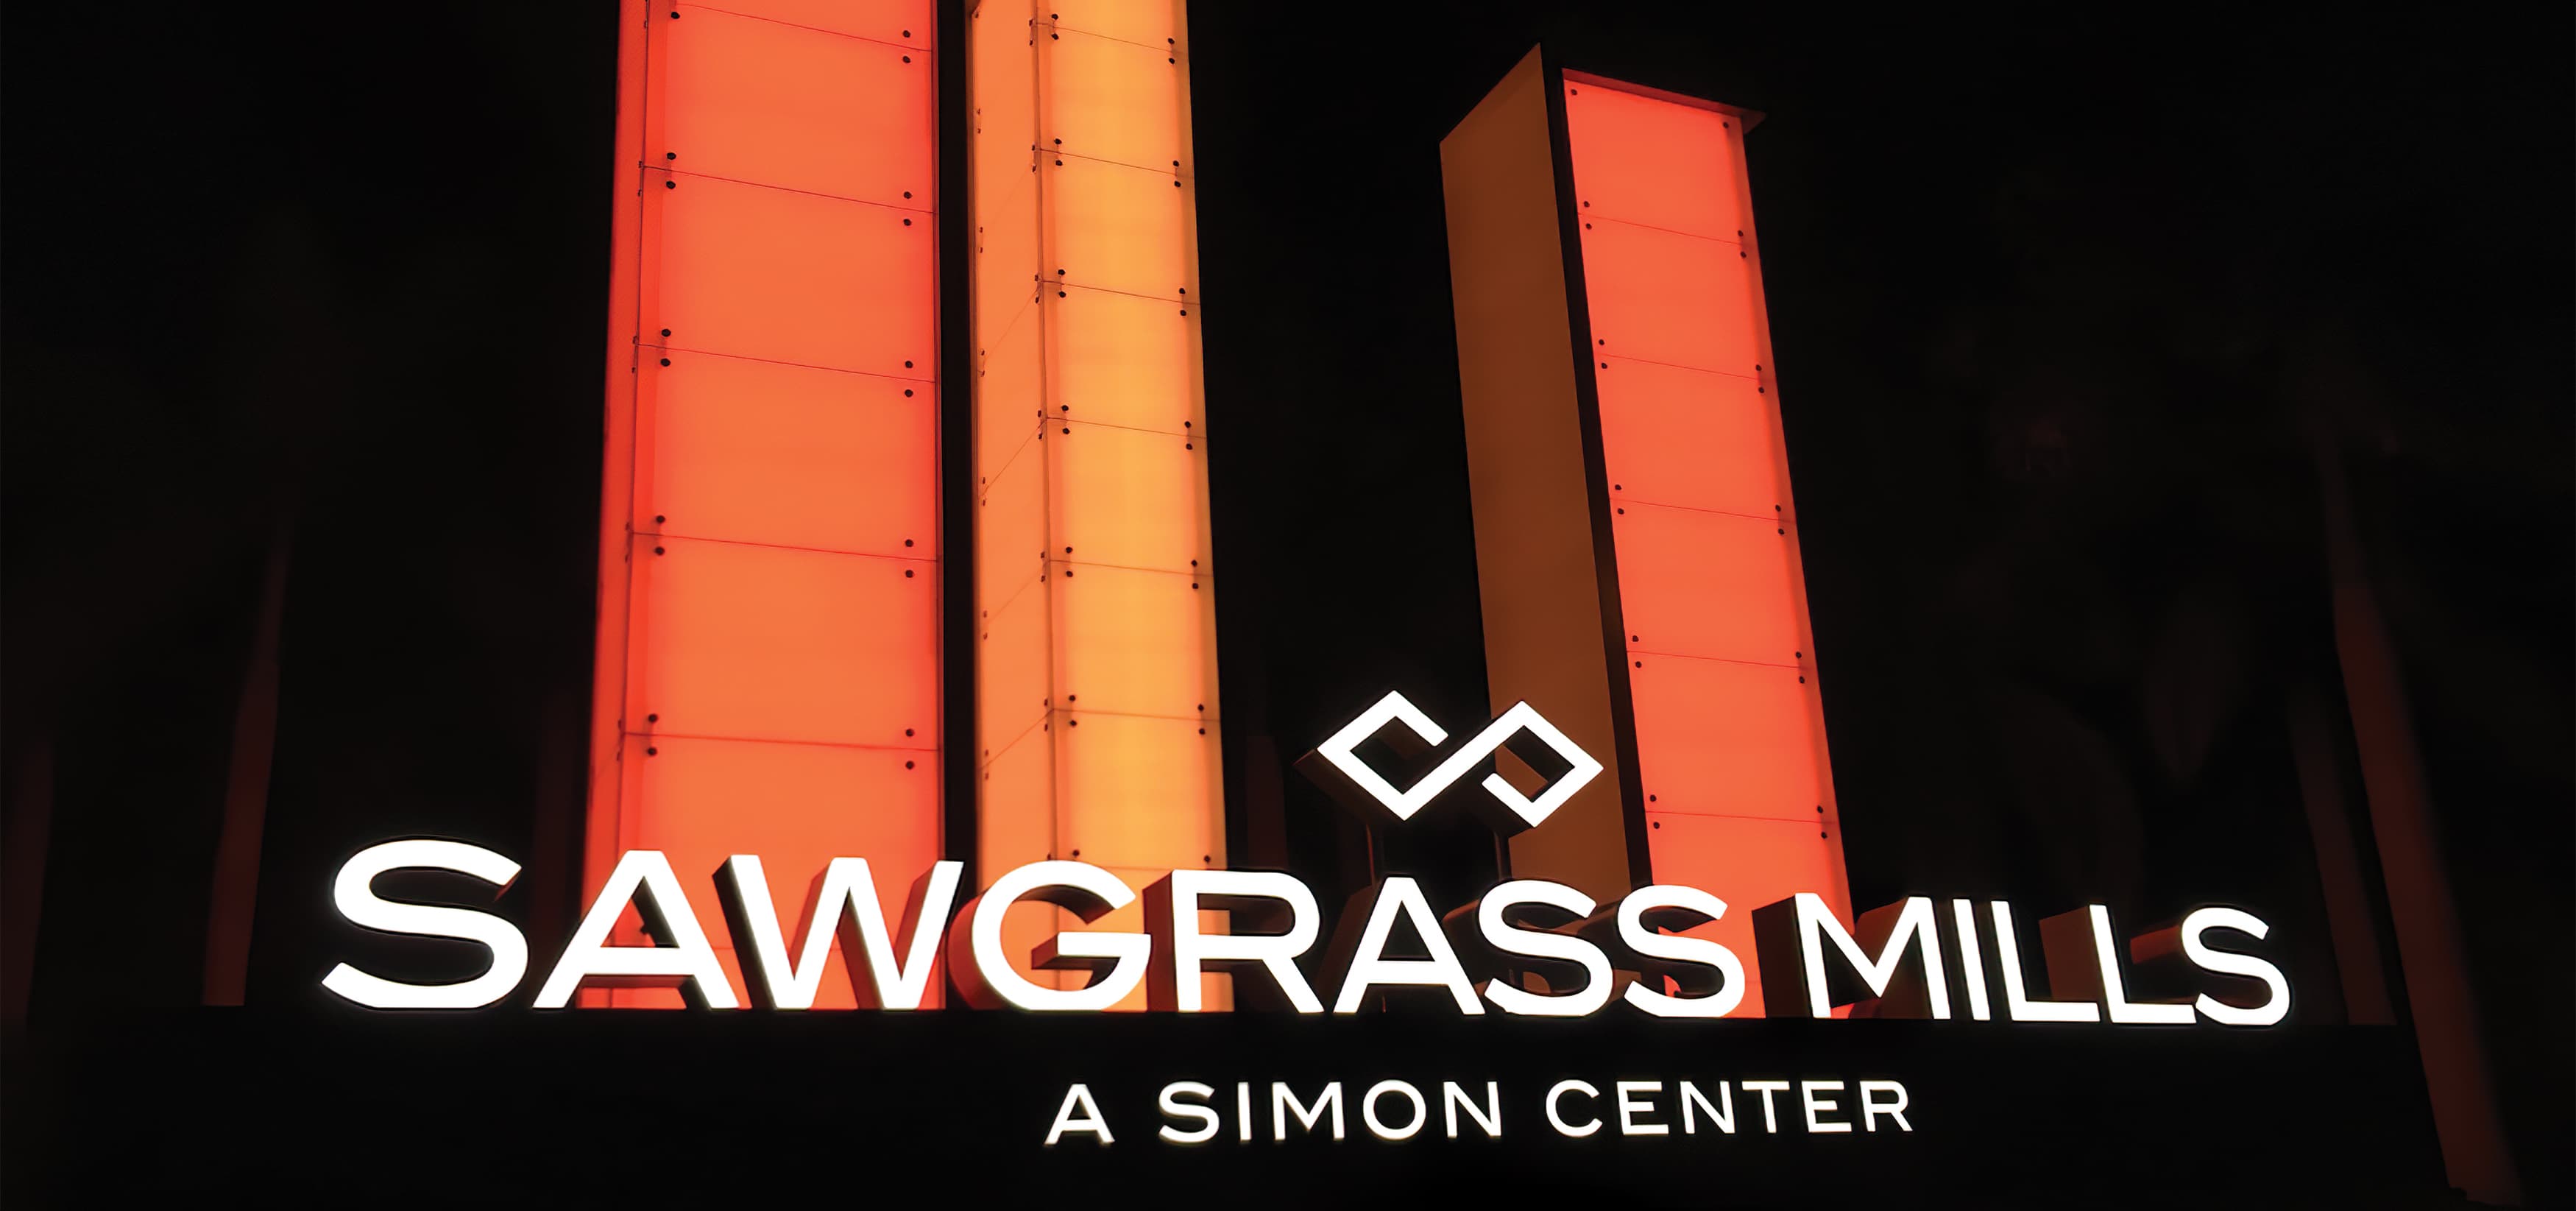 RSM Design worked to develop wayfinding signage, environmental graphics, and placemaking elements for Sawgrass Mills, a Simon Center located in Sunrise, Florida.